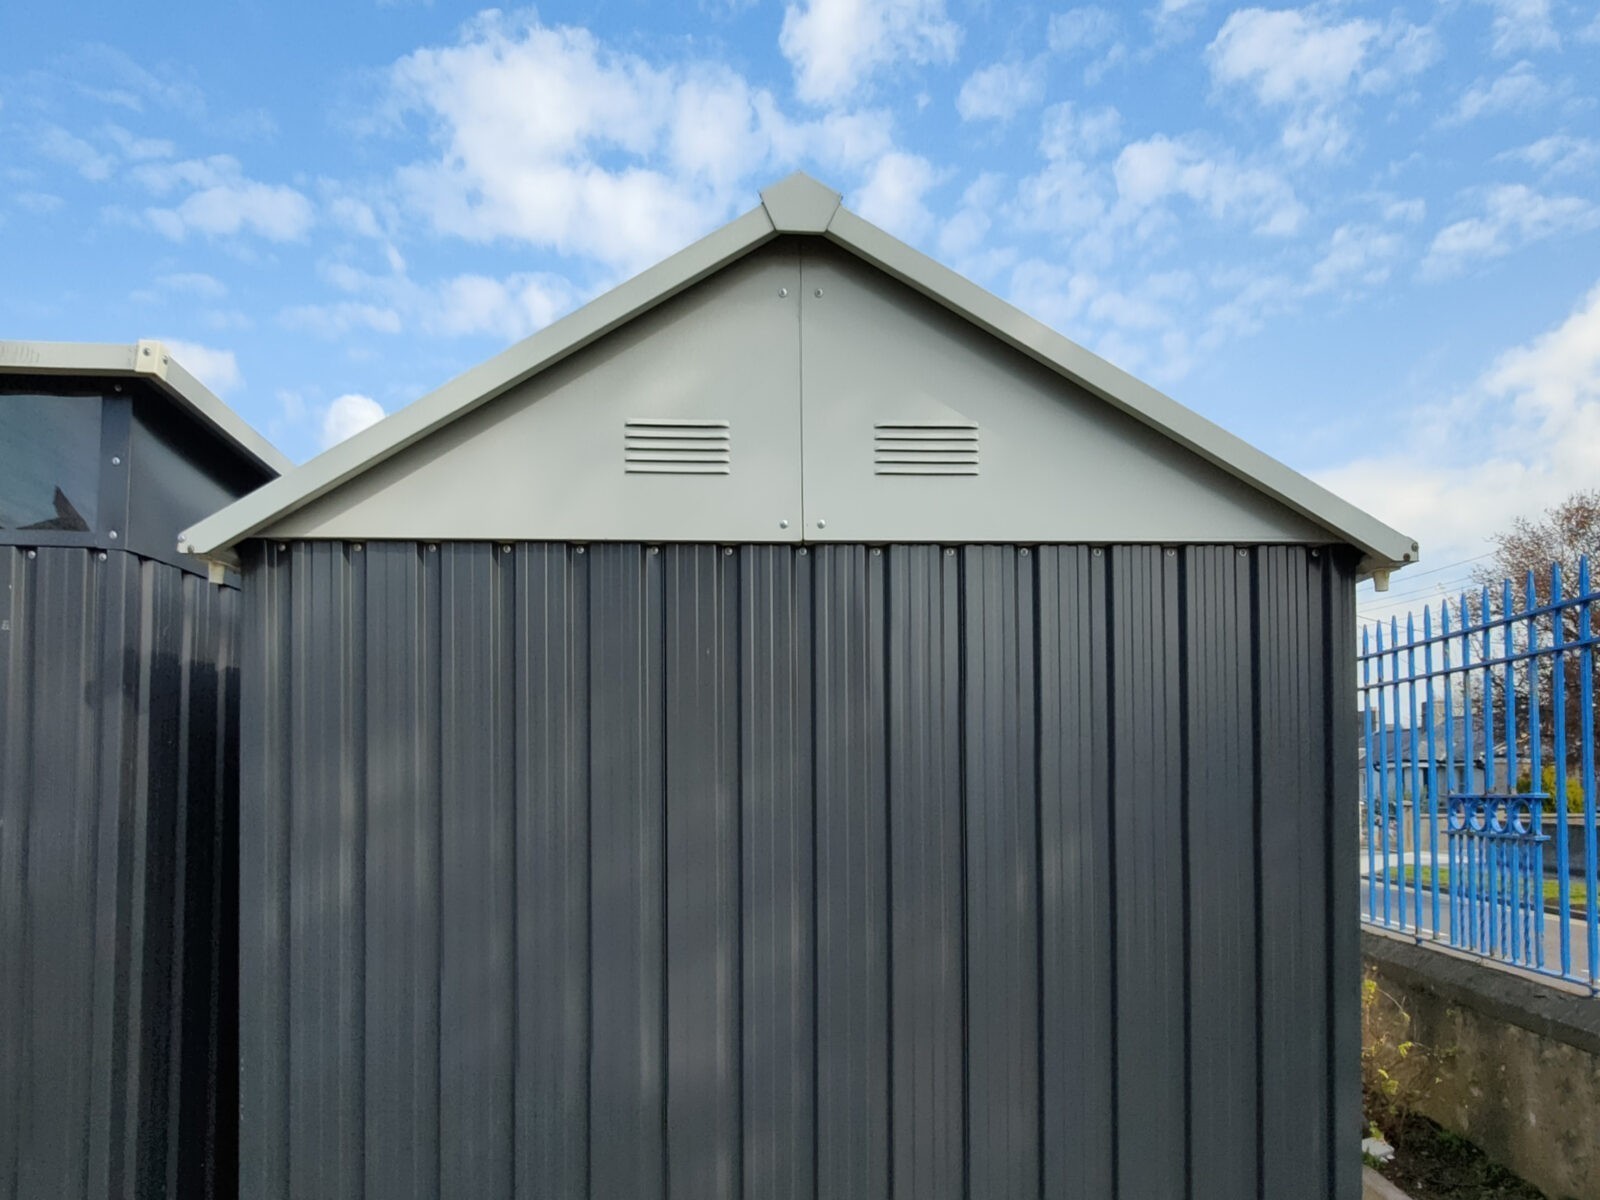 A view of the side of the shed where the apex is